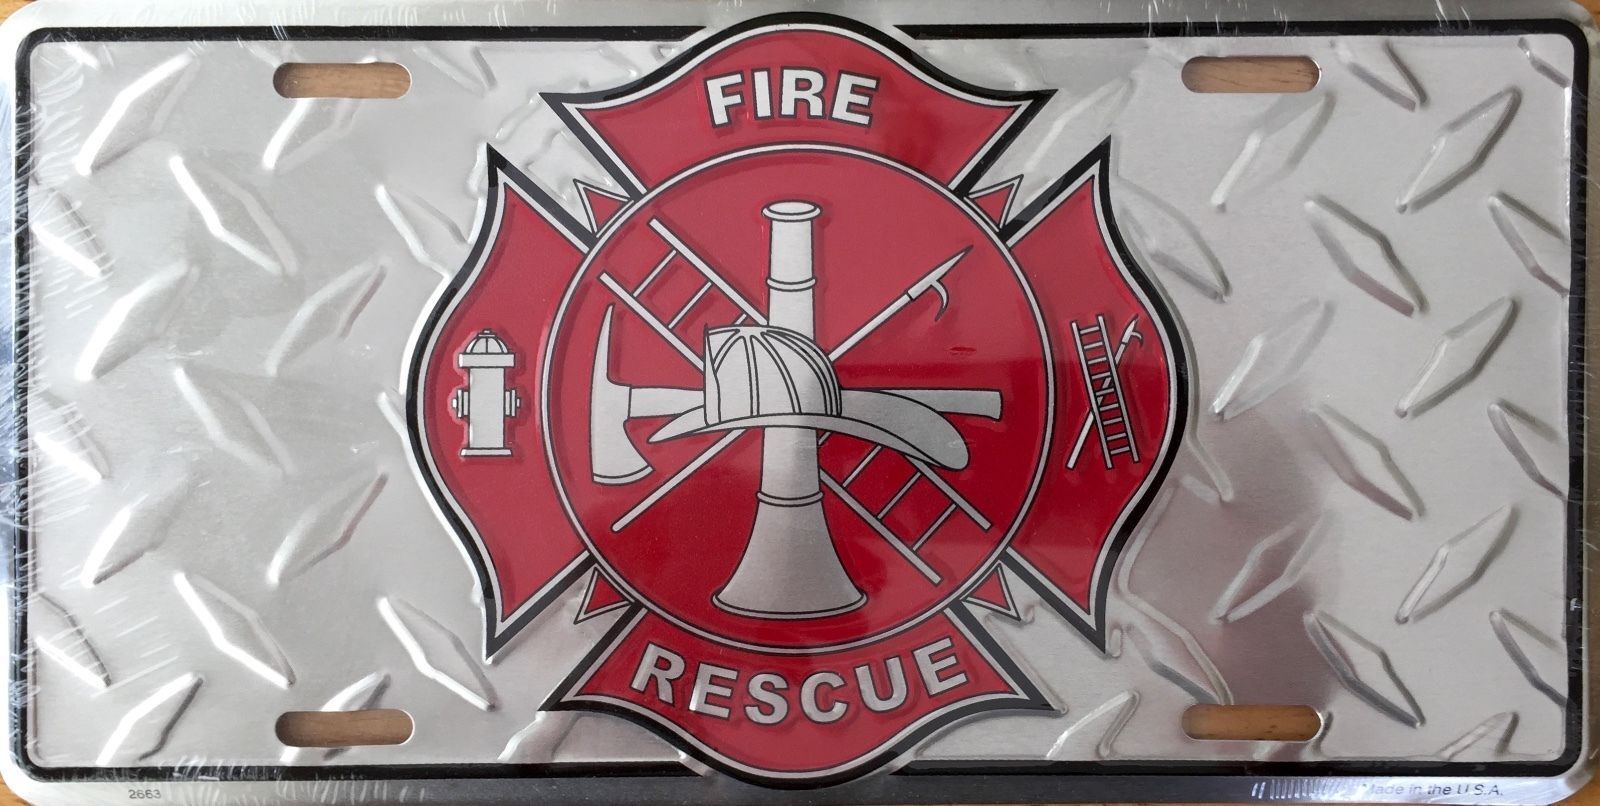 Fire Fighter Rescue Diamond Wholesale Metal Novelty License Plate Wall Decor